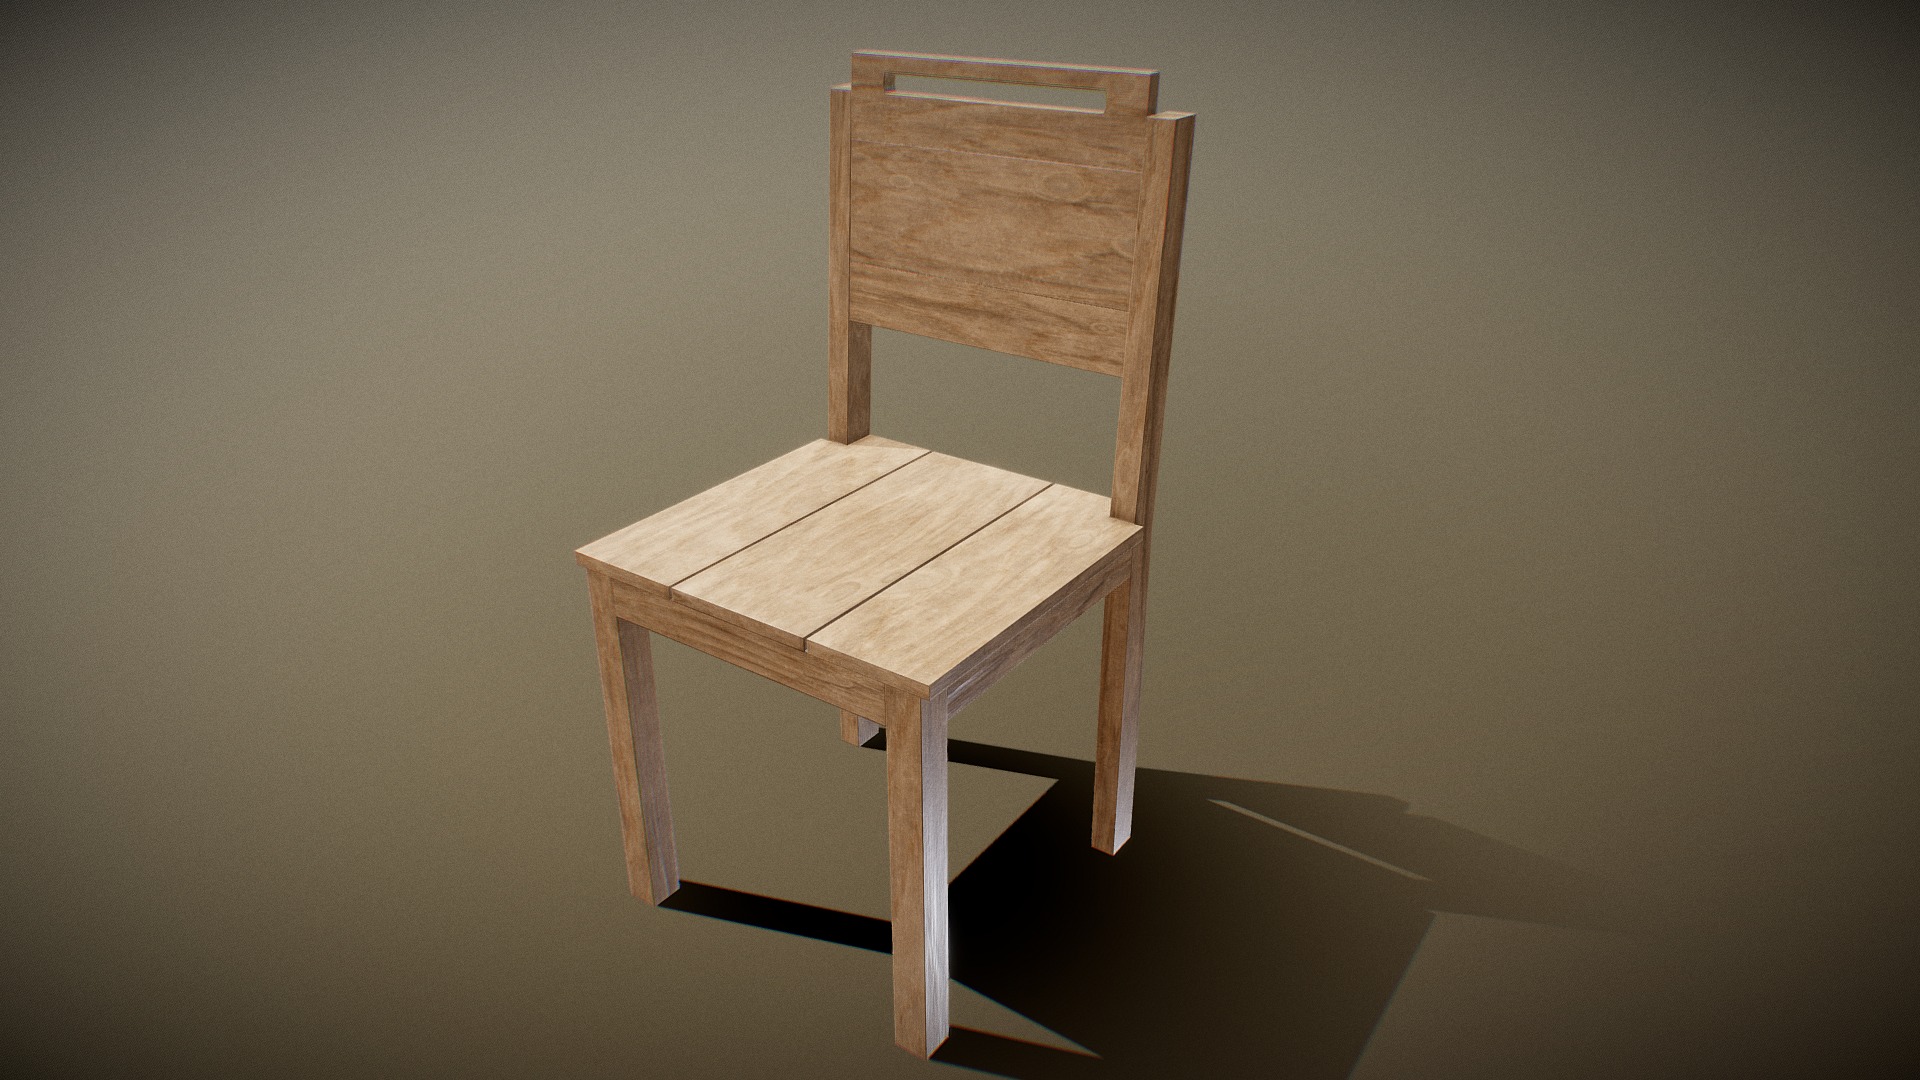 3D model Chair wooden 04 - This is a 3D model of the Chair wooden 04. The 3D model is about a wooden chair in a room.